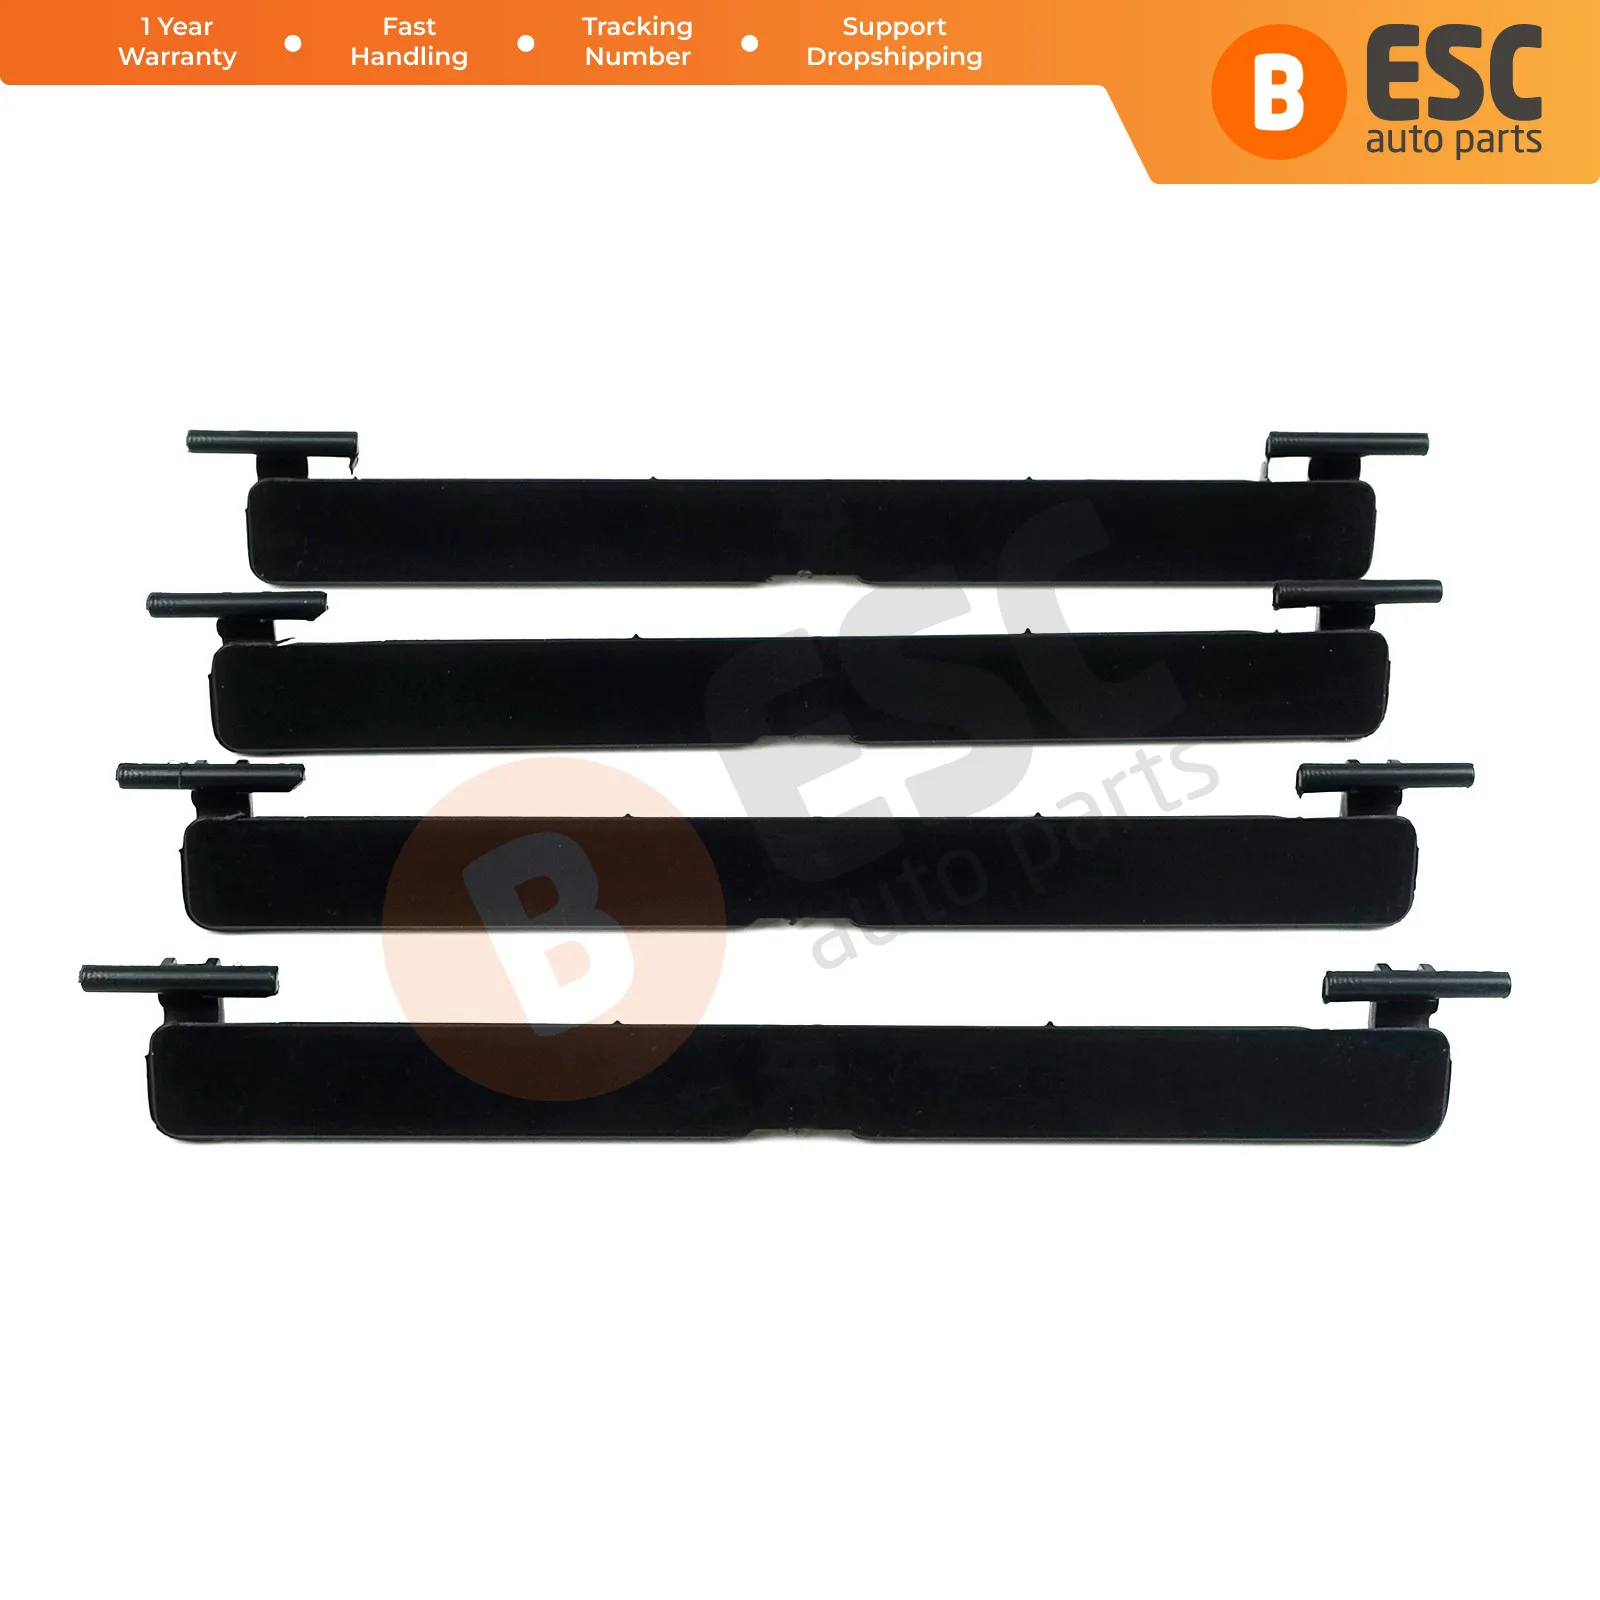 

ESR575-1 4x Roof Luggage Rack Carrier Mounting Molding Port Bag Rail Lid Cover Trim 51137274739 for BMW 5 F10 F11 135*13 mm